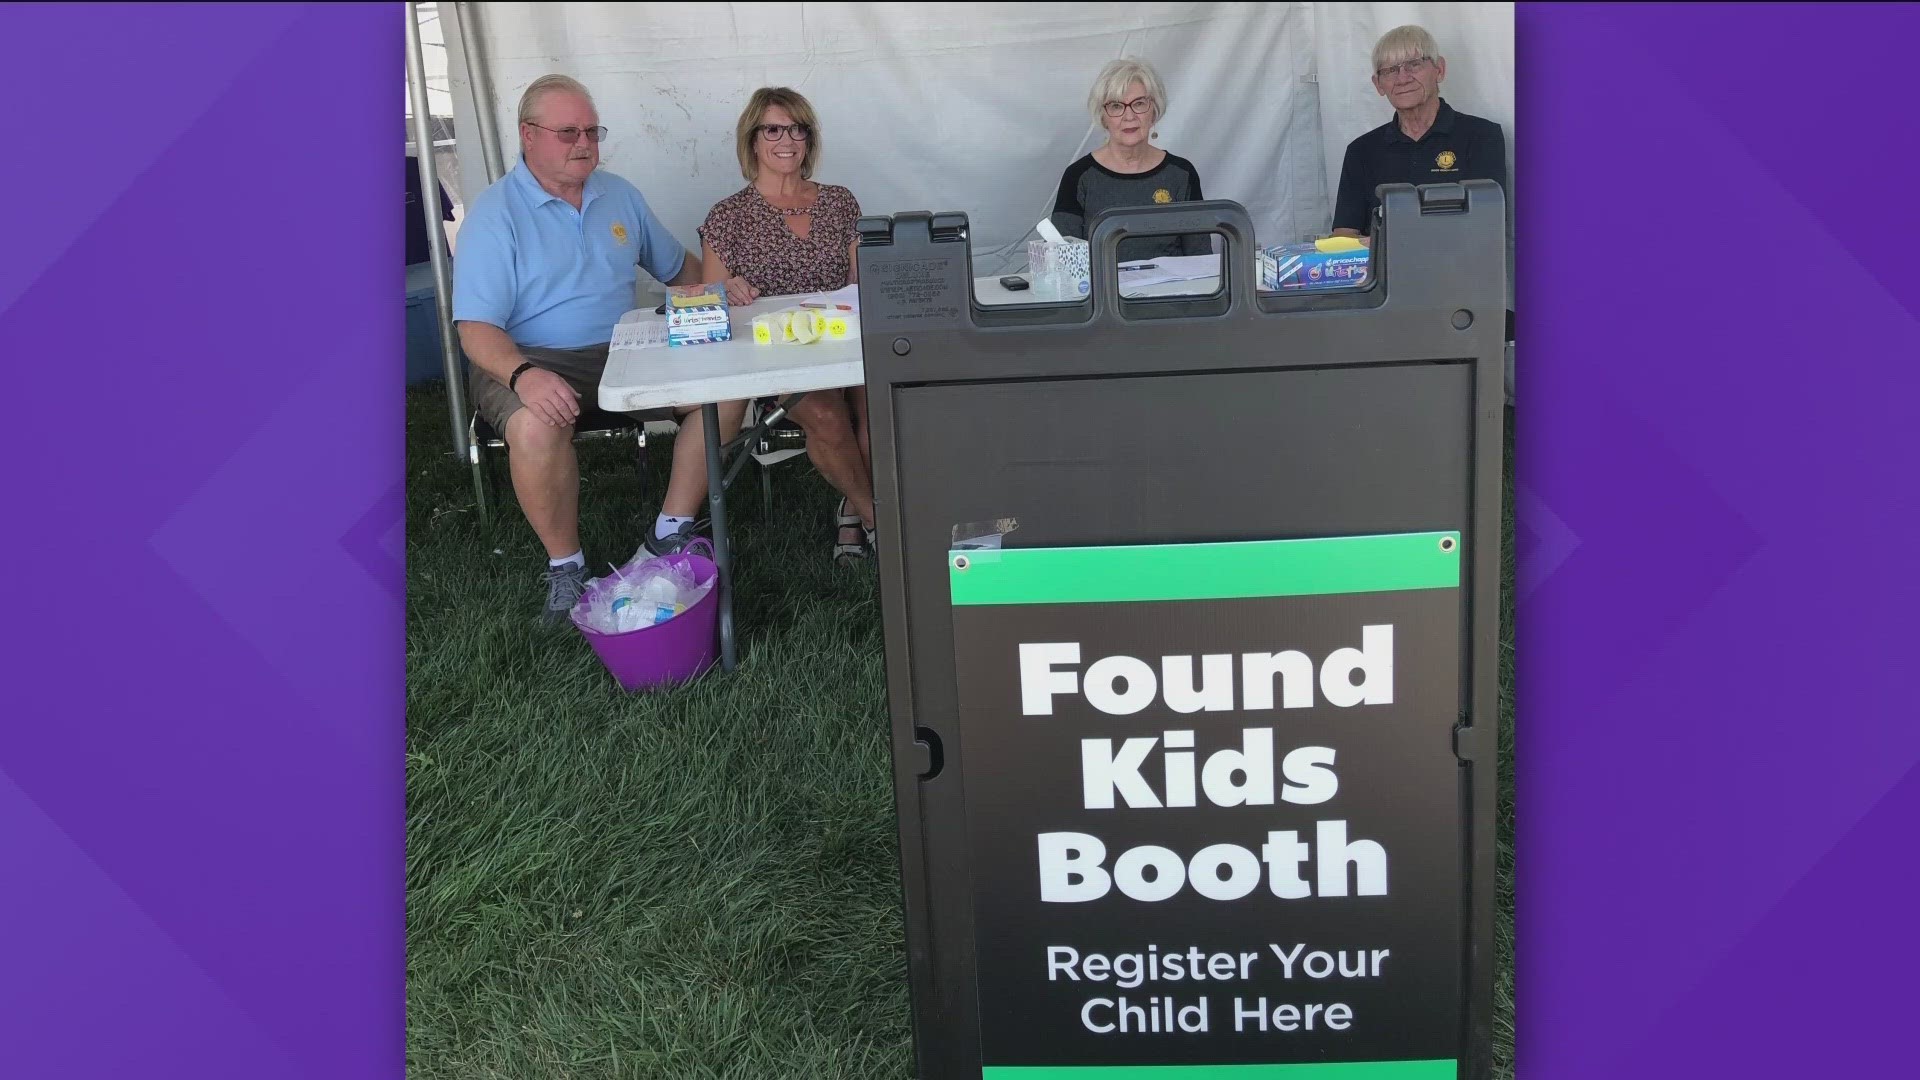 Kids registered at the booth receive an arm band to be tracked as quickly as possible. The Boise Bench Lions will staff the booth during regular fair hours.